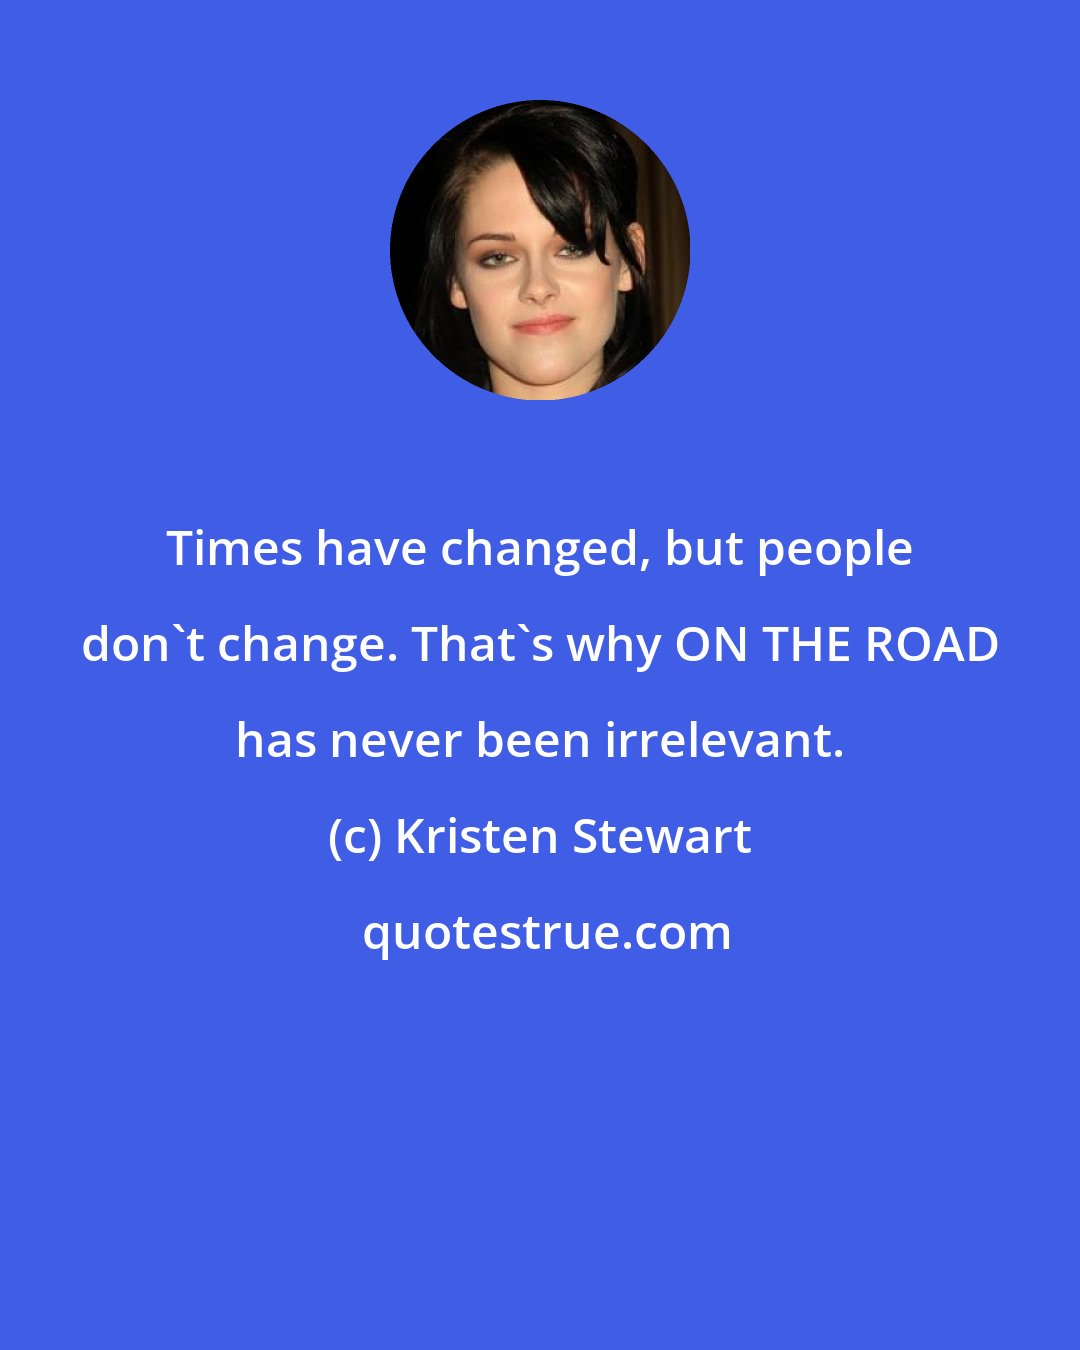 Kristen Stewart: Times have changed, but people don't change. That's why ON THE ROAD has never been irrelevant.